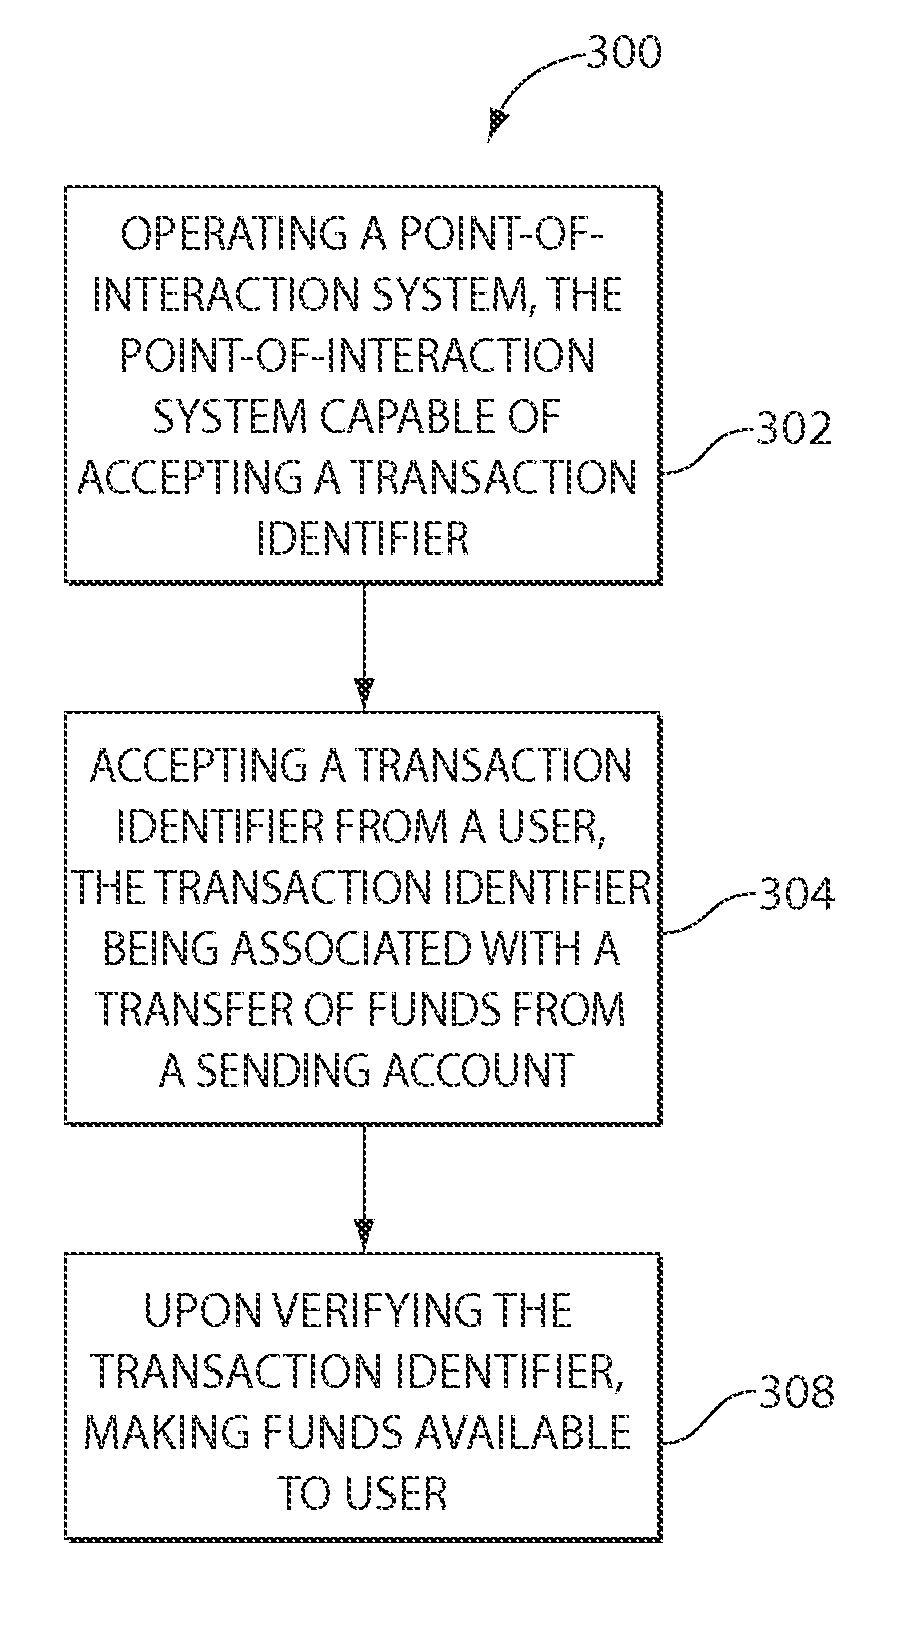 Systems and methods for transferring funds from a sending account